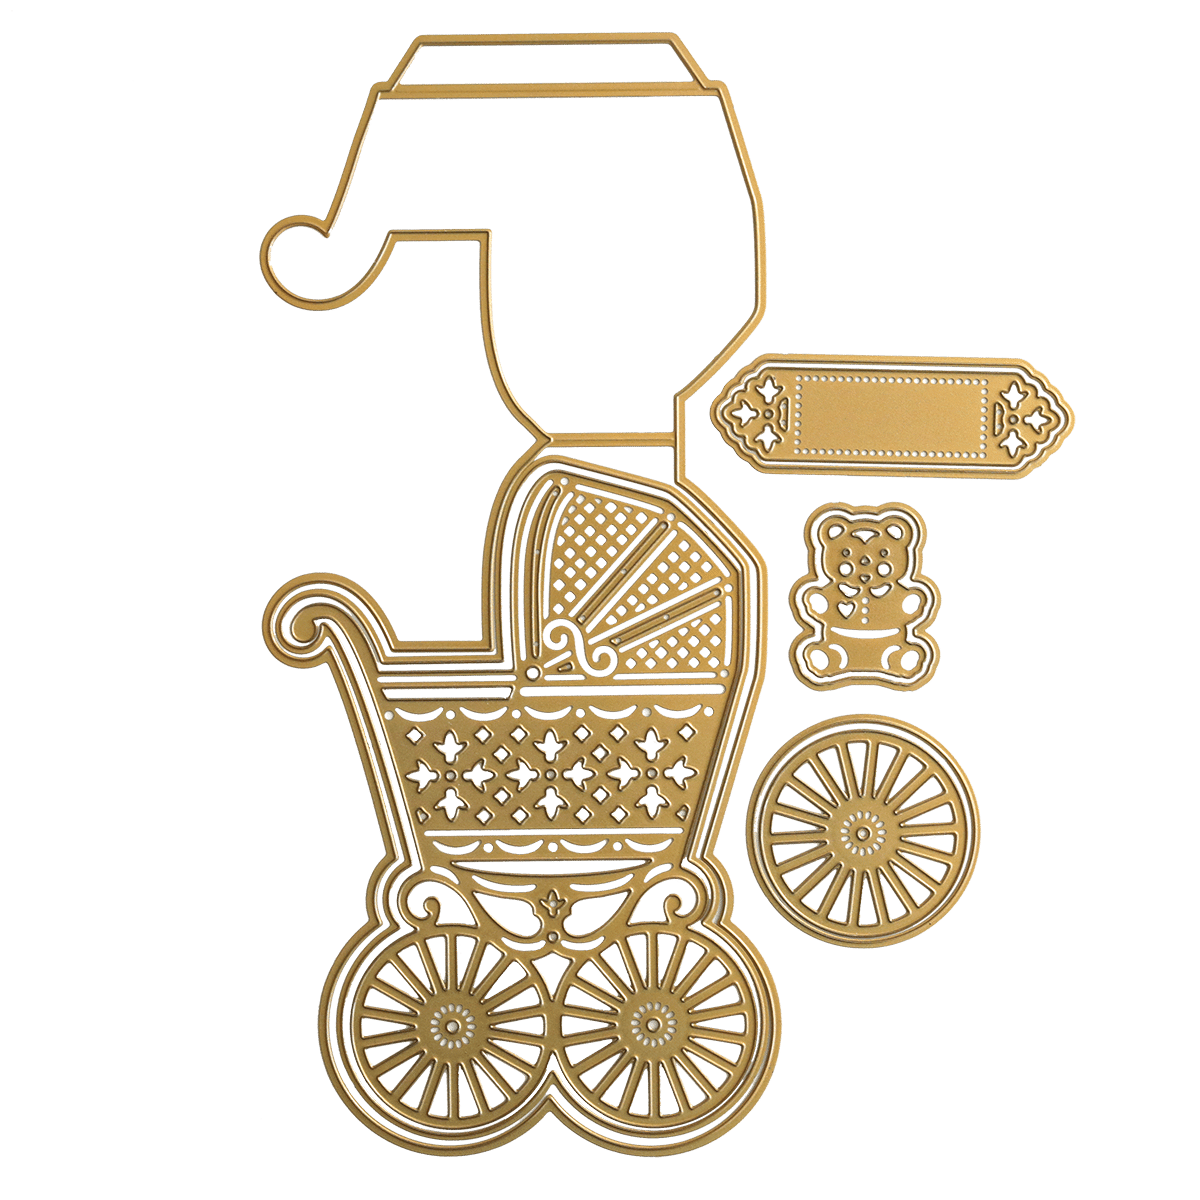 a golden baby carriage with a tag on it.